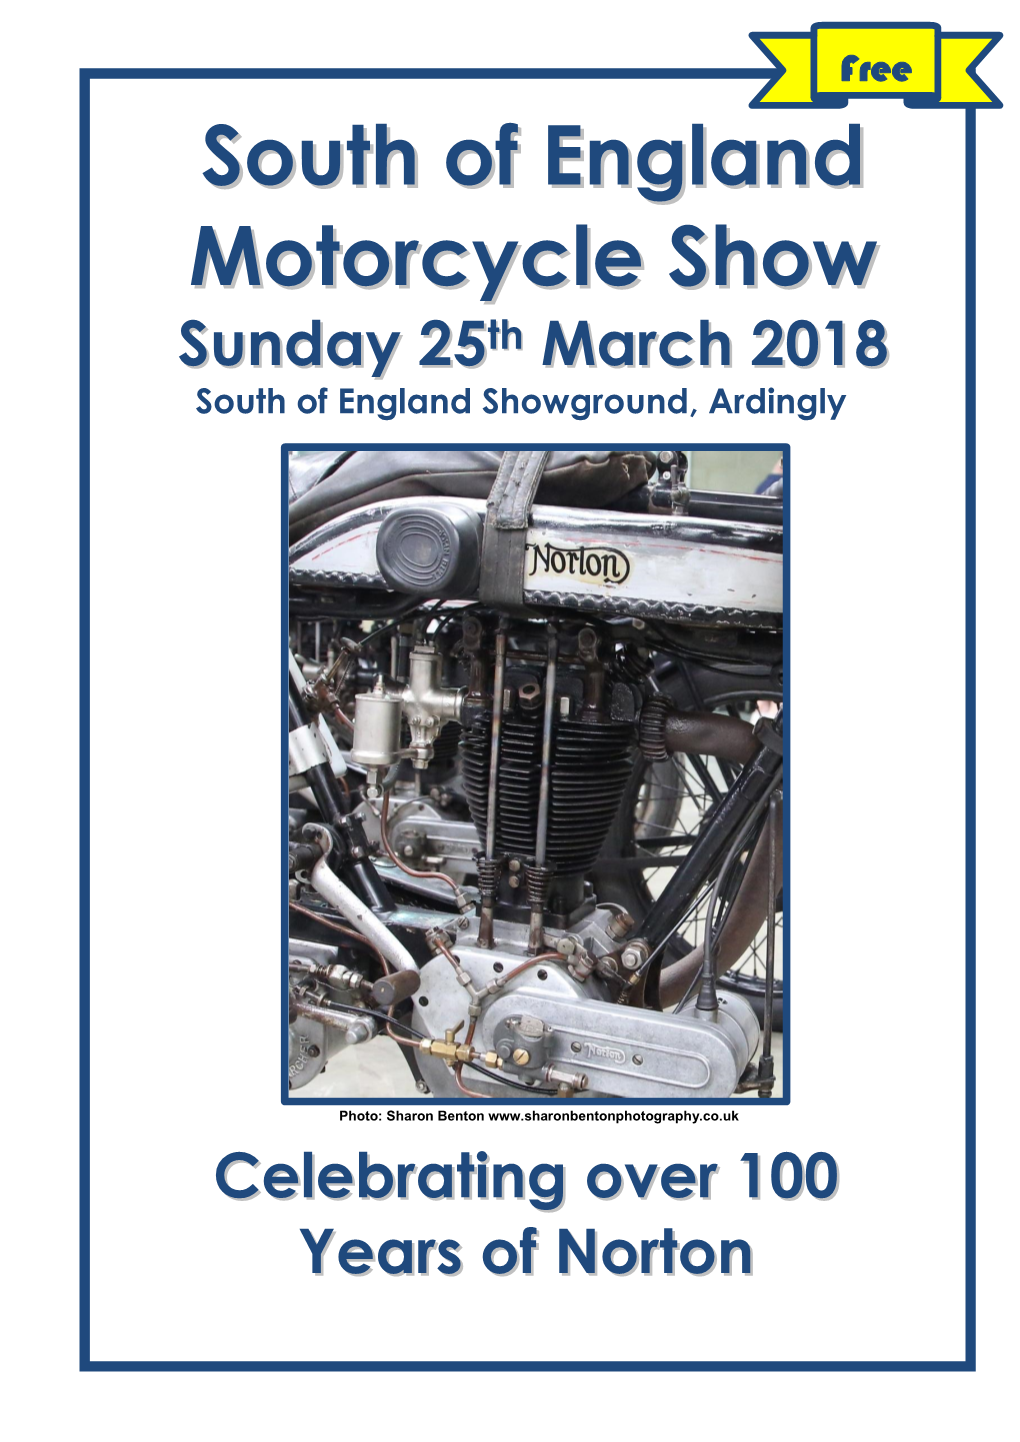 South of England Motorcycle Show